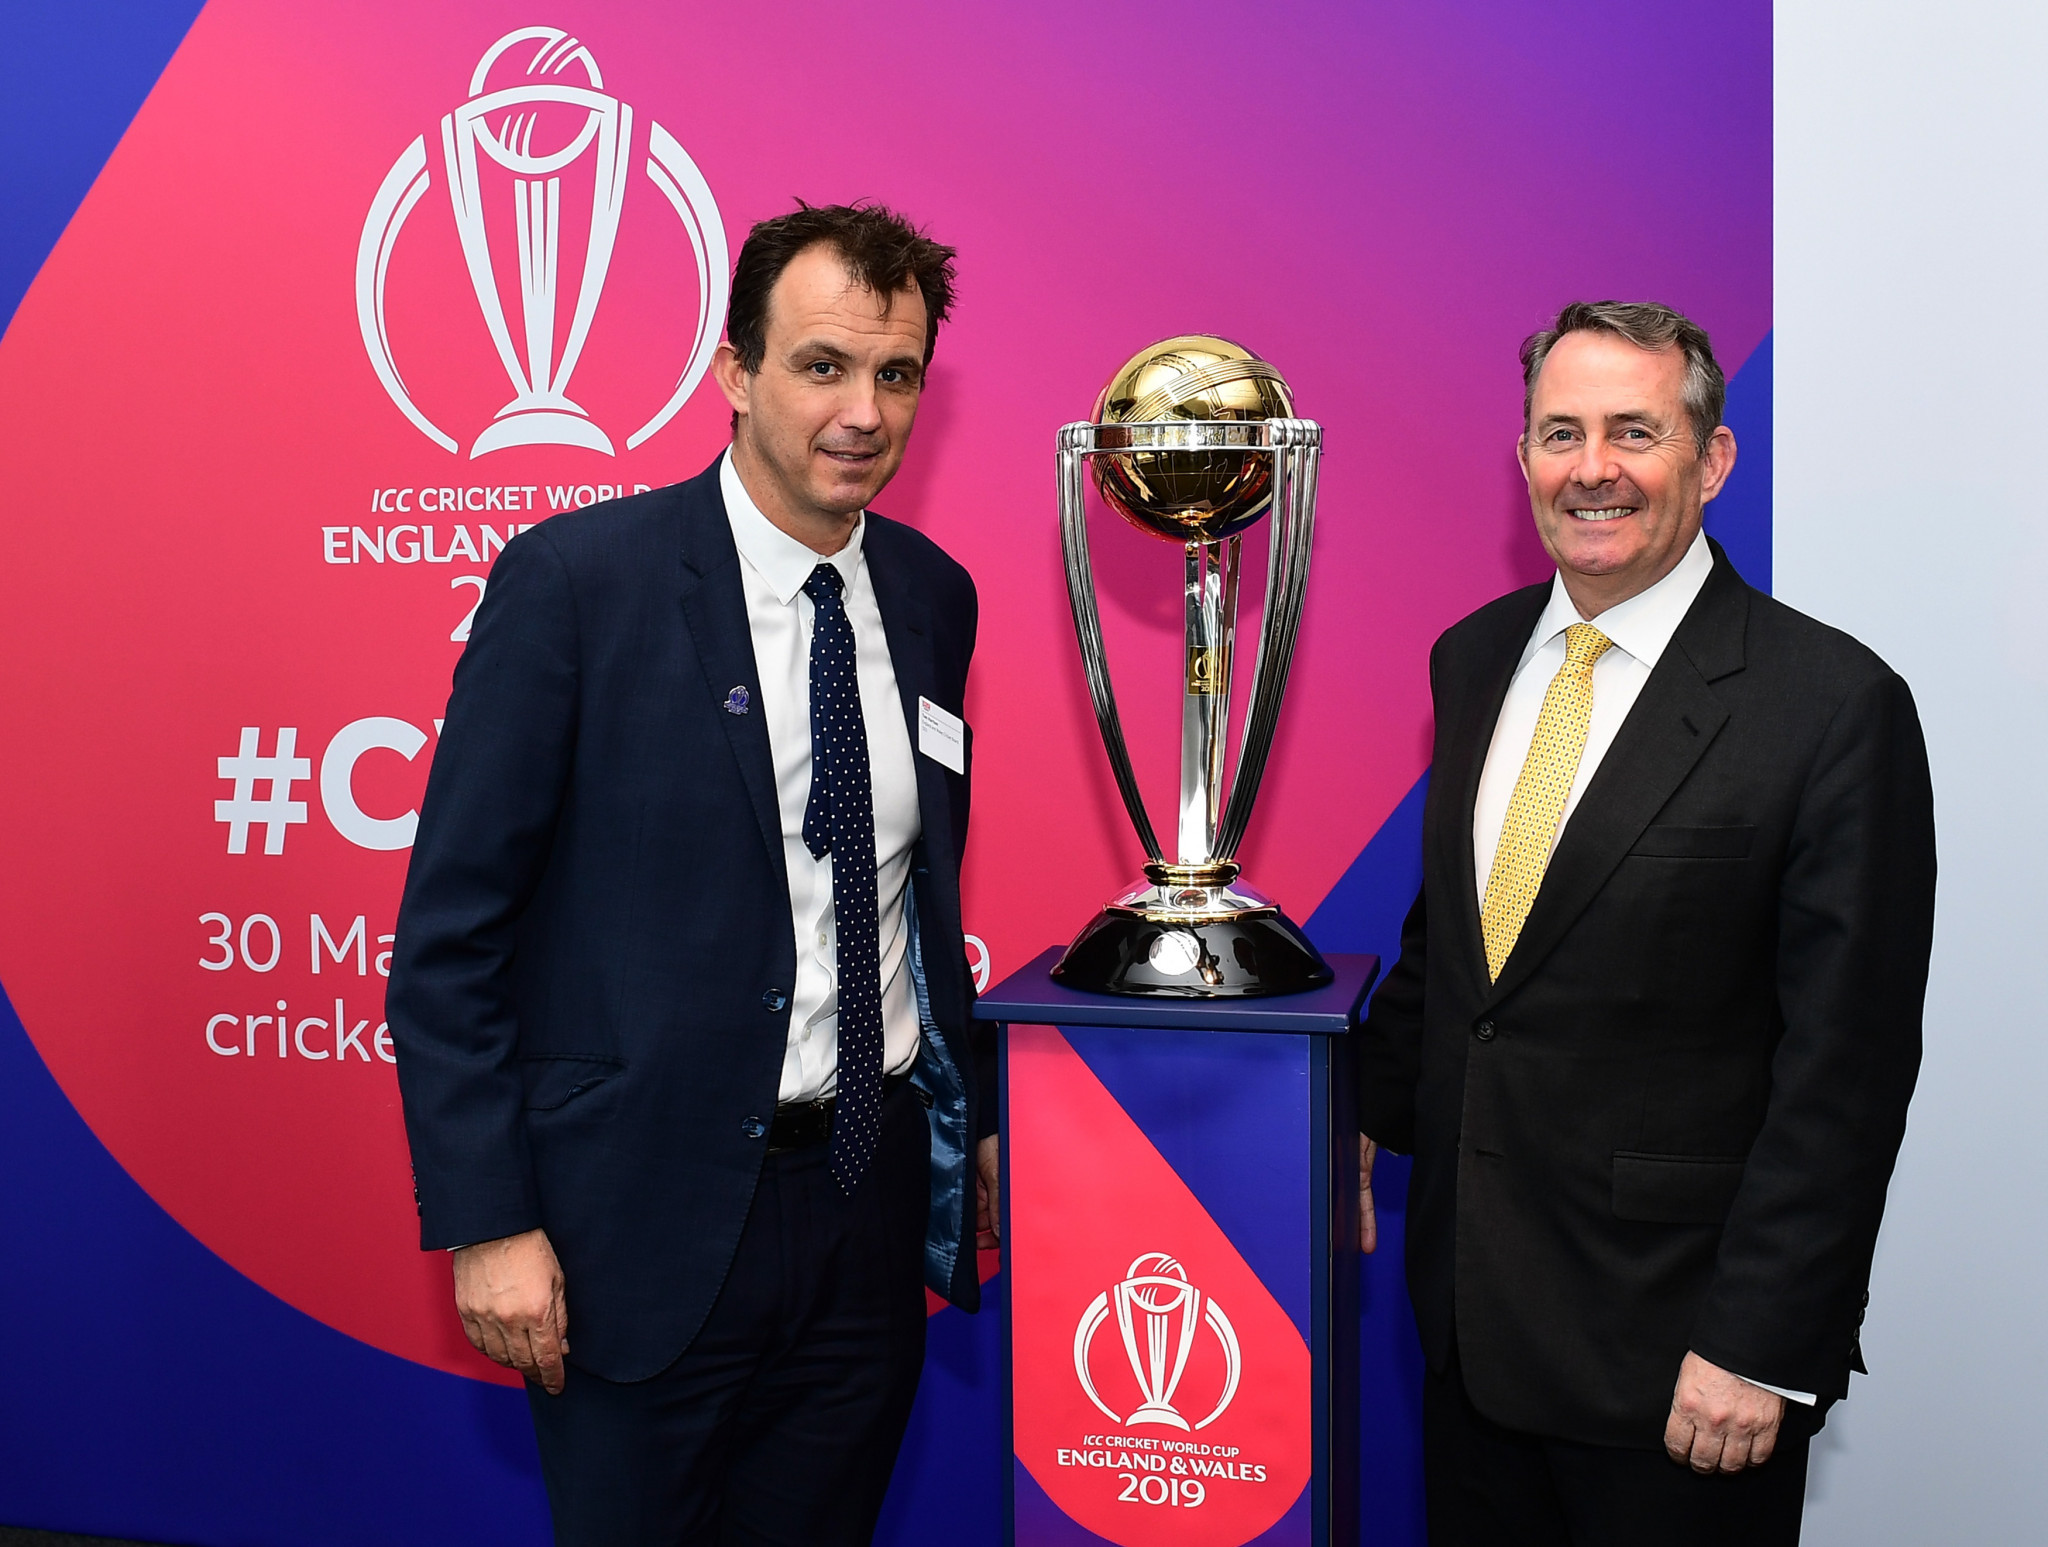 ECB chief executive Tom Harrison has claimed hosting next year's Cricket World Cup provides a "once in a lifetime" opportunity to grow the game ©Getty Images